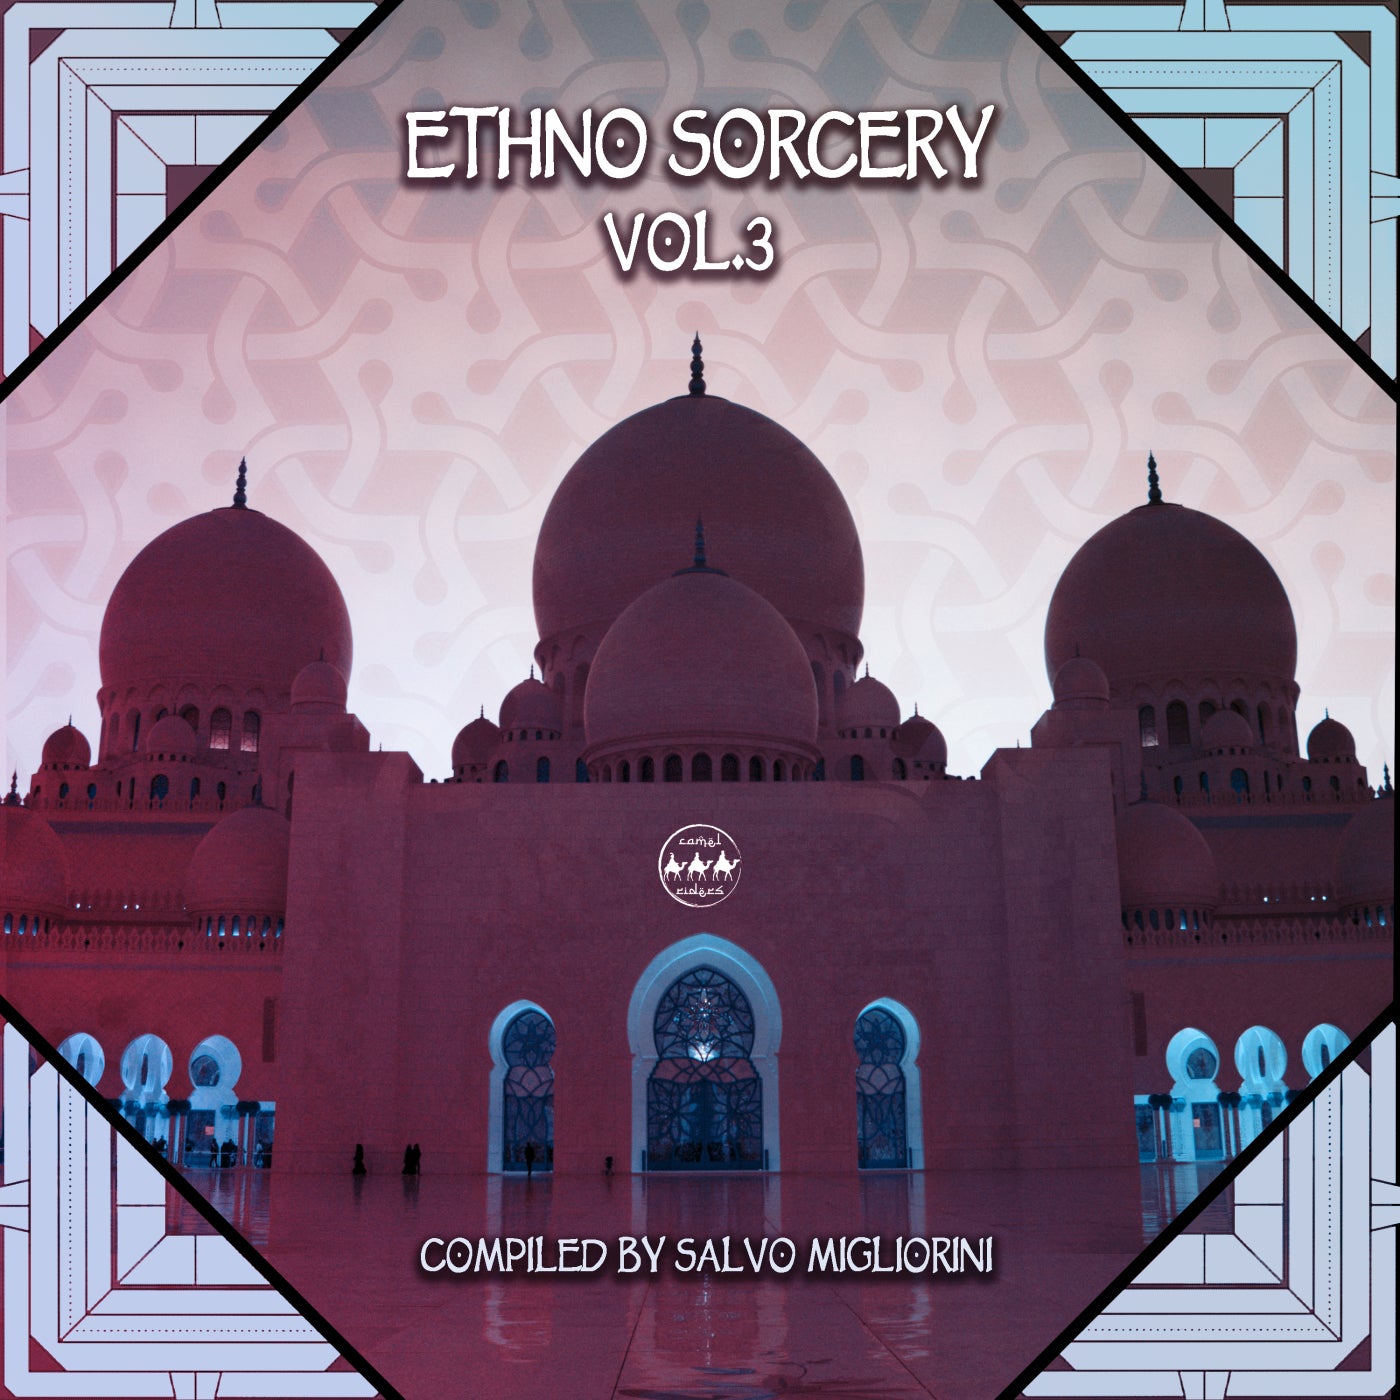 Download Ethno Sorcery, Vol. 3 (Compiled by Salvo Migliorini) on Electrobuzz